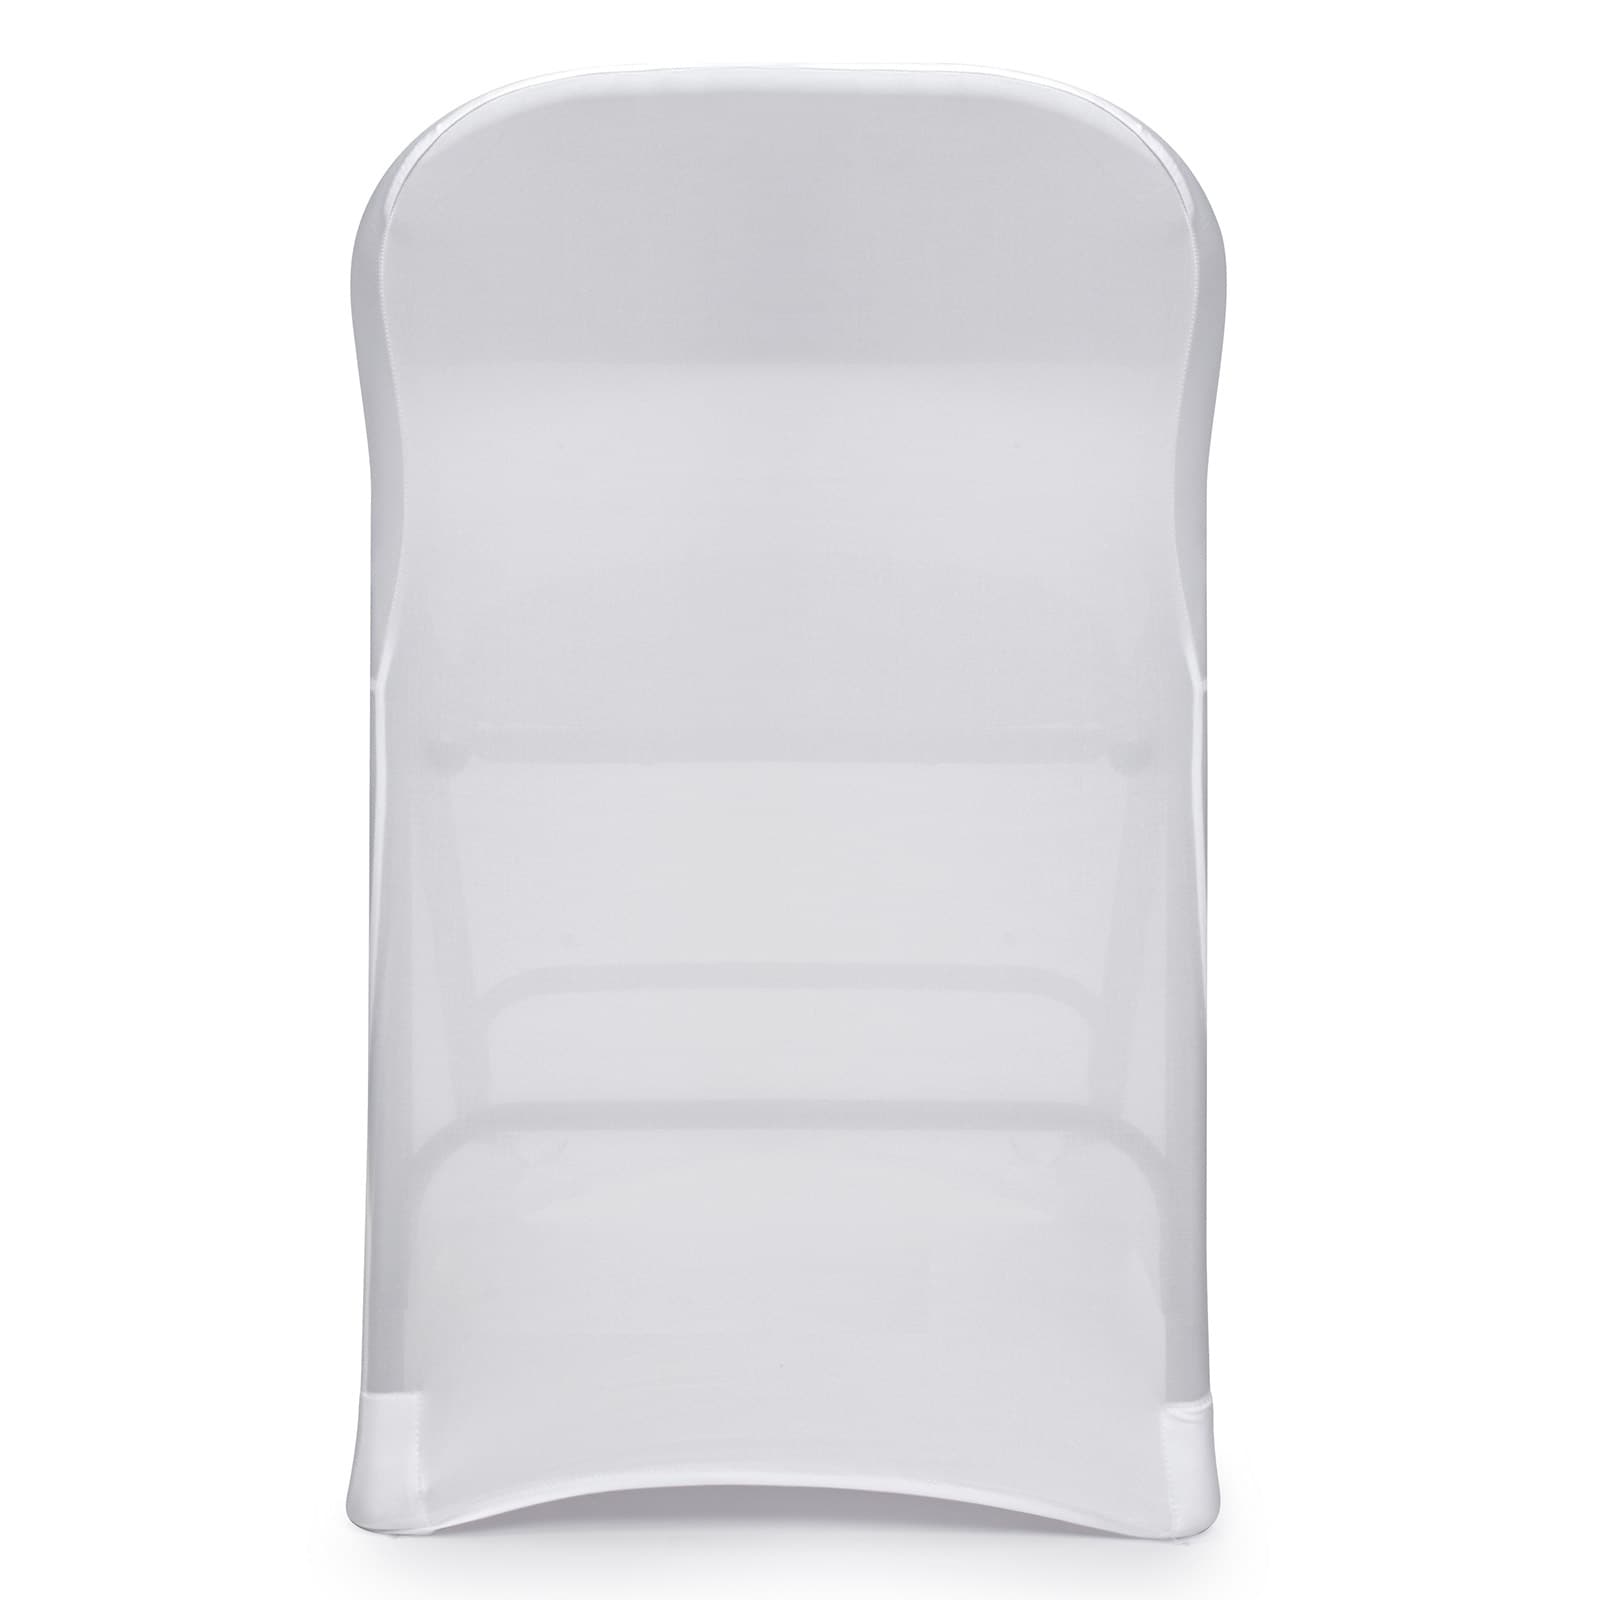 100-Count Spandex Folding Chair Covers - White - Bed Bath & Beyond -  31074735